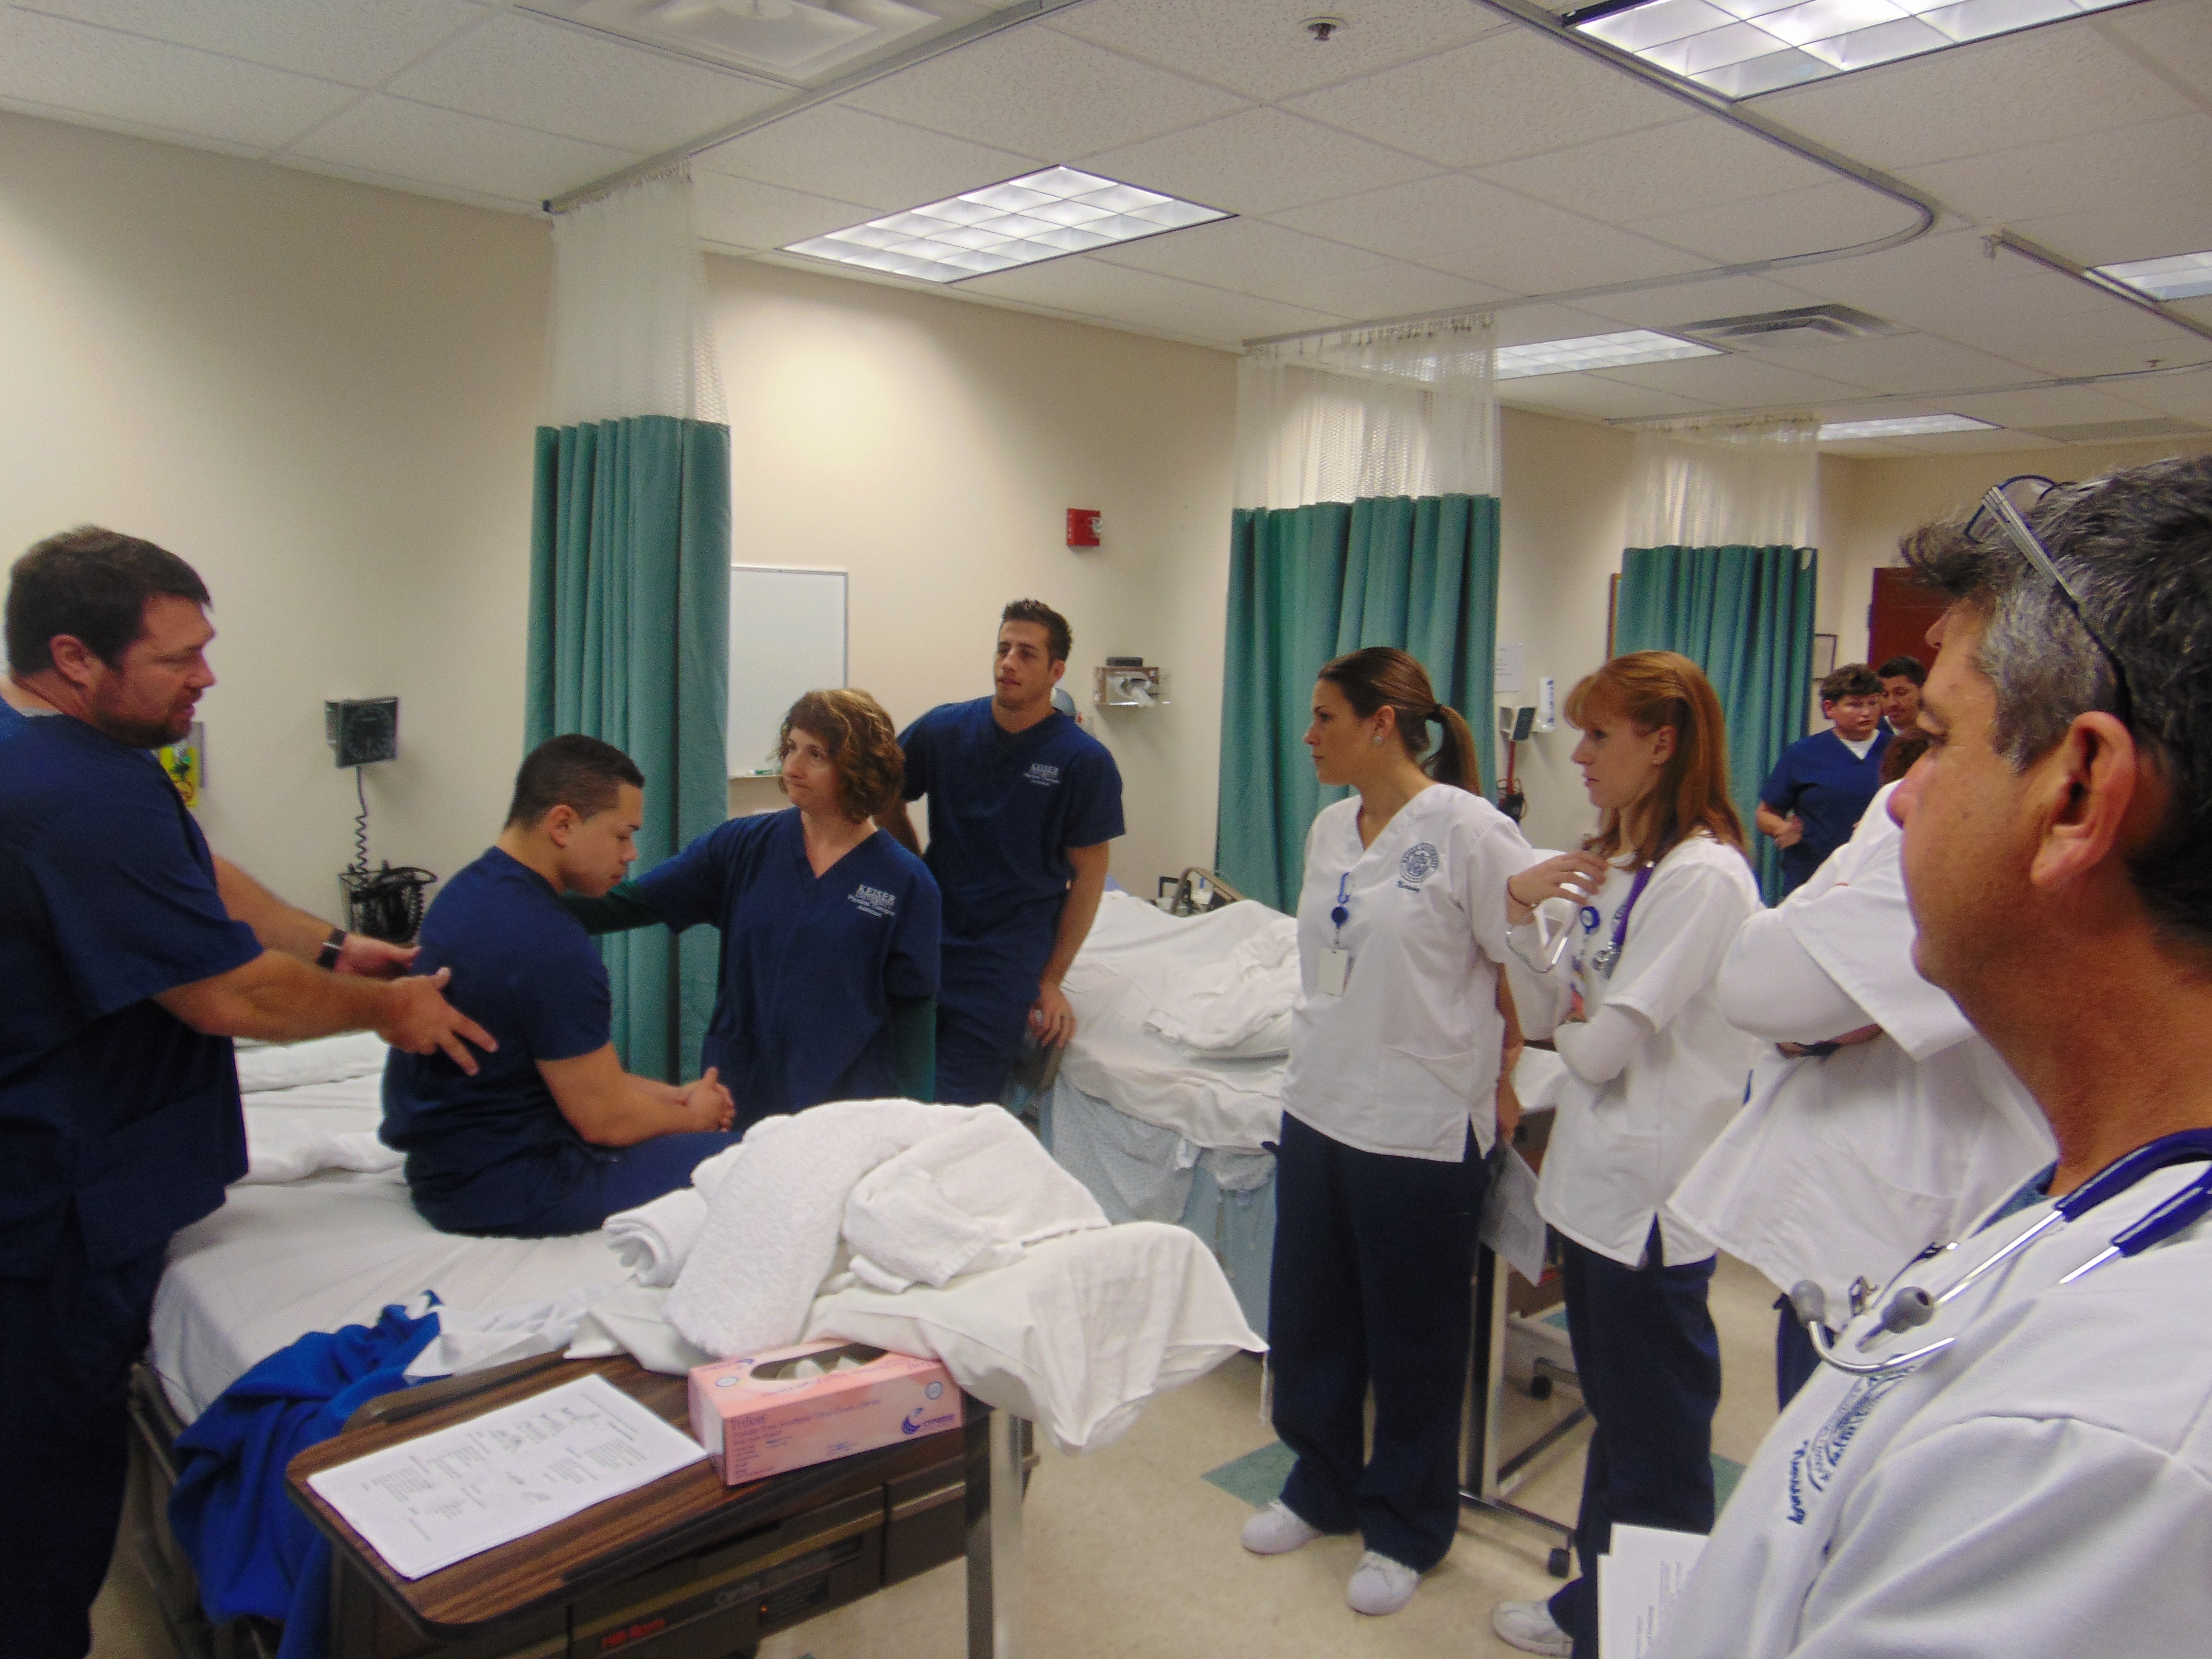 Physical Therapy Assistant and Nursing Students Demonstrate the Importance of Collaboration